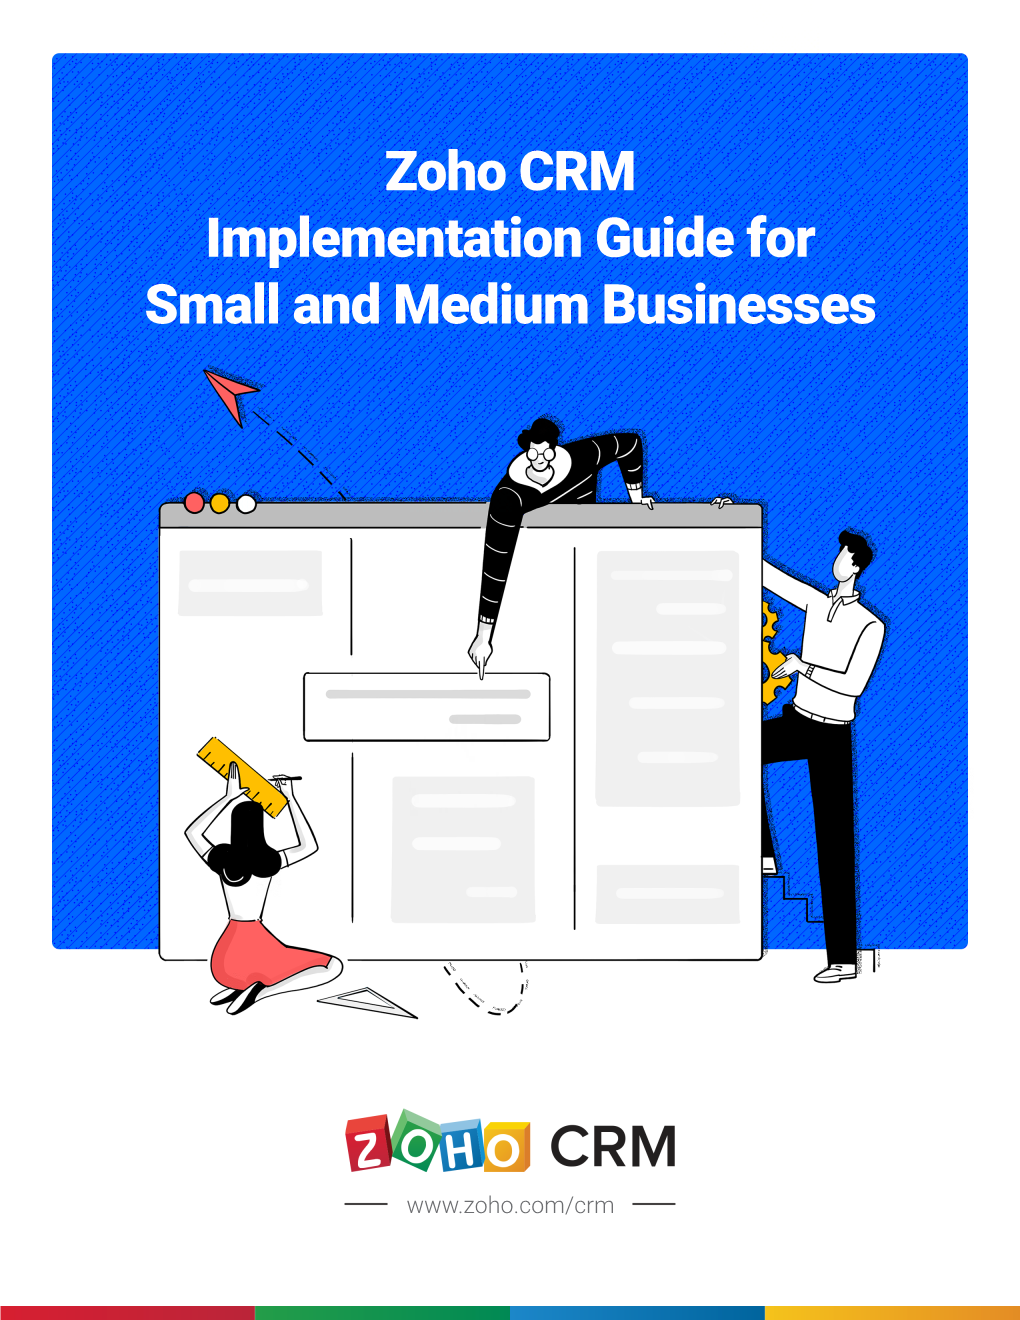 Zoho CRM Implementation Guide for Small and Medium Businesses